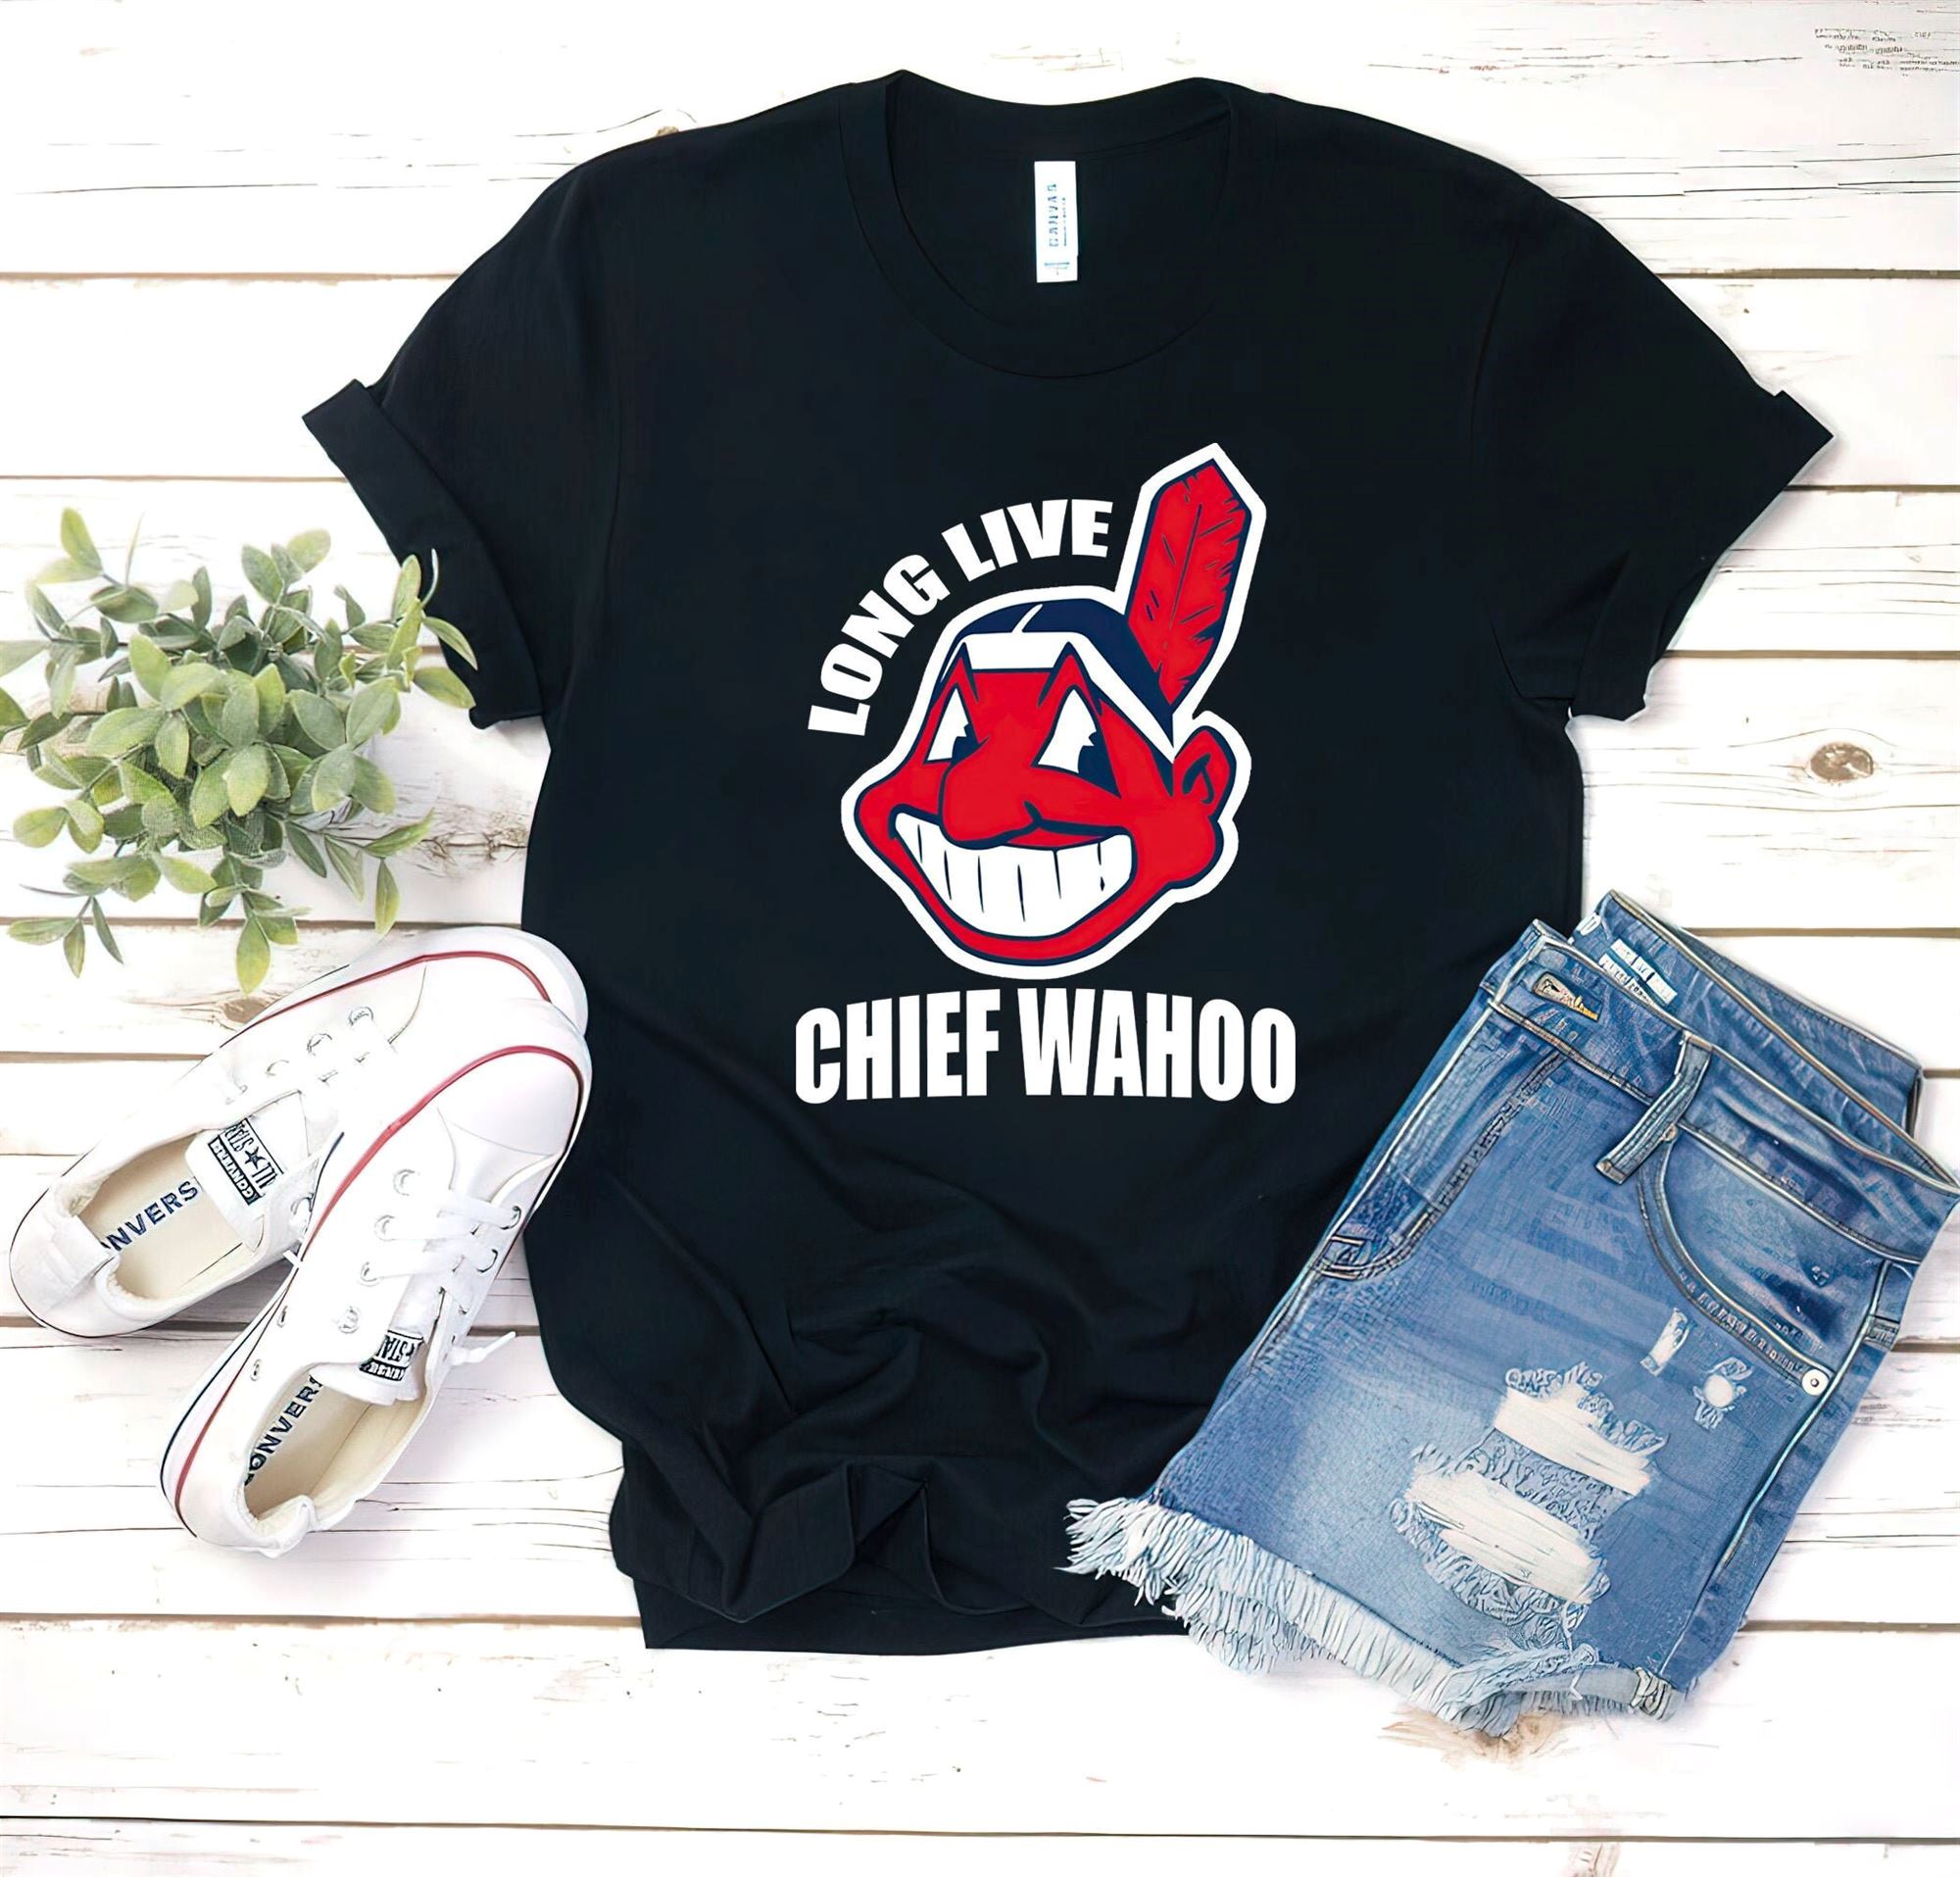 Amazing Cleveland Indians Long Live Chief Wahoo Shirt Long Live Chief Wahoo Sweatshirt Cleveland Sweatshirt Cleveland Indians Shirt 